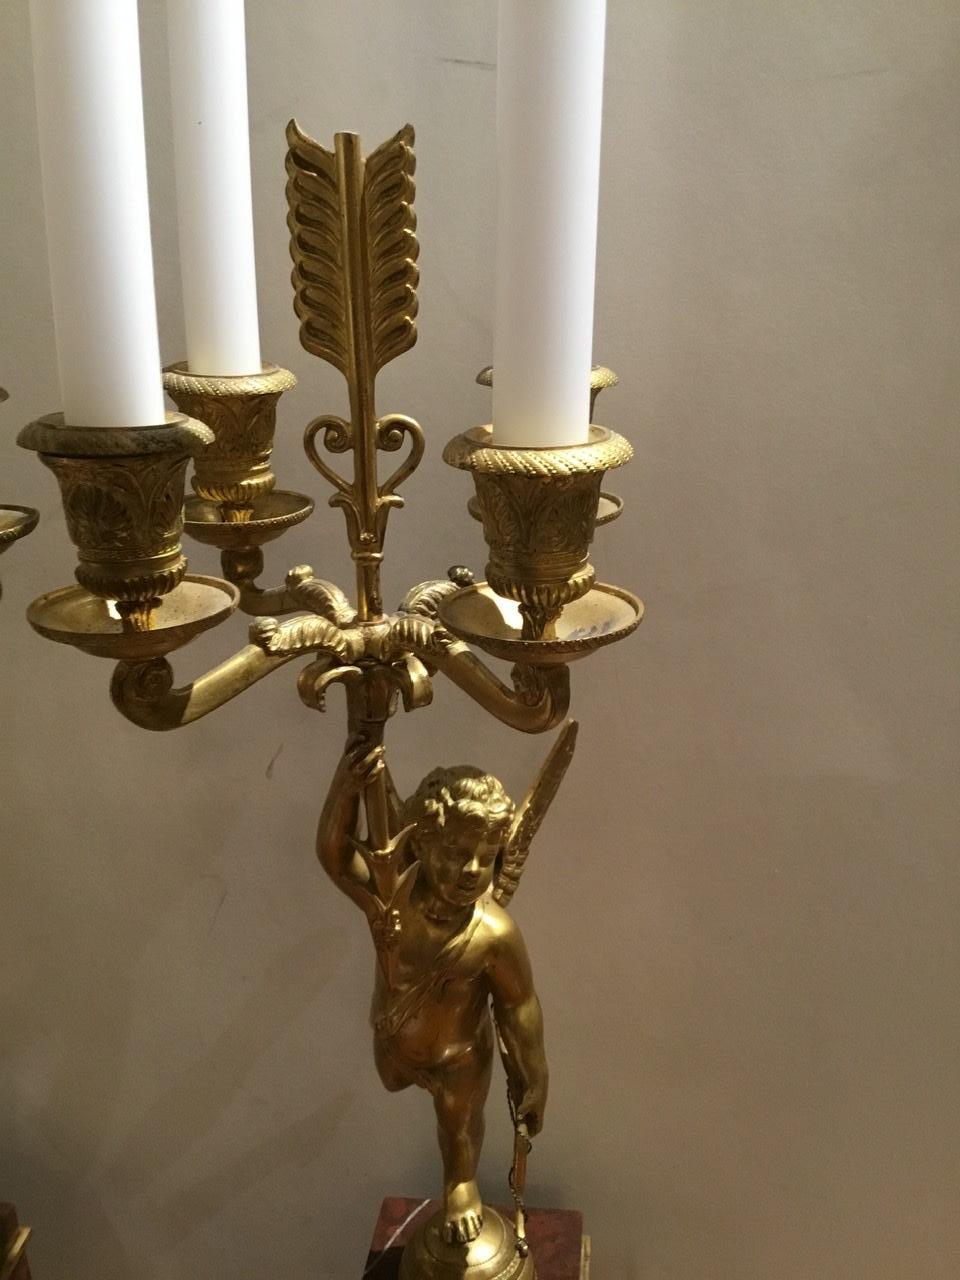 Empire style four light candelabrum, cupid-form standards poised on
Turned half spheres, holding a bow in one hand and an arrow supporting
Candle arms set with anthemion-molded cups in the other, the marble
Bases decorated with bronze appliqués